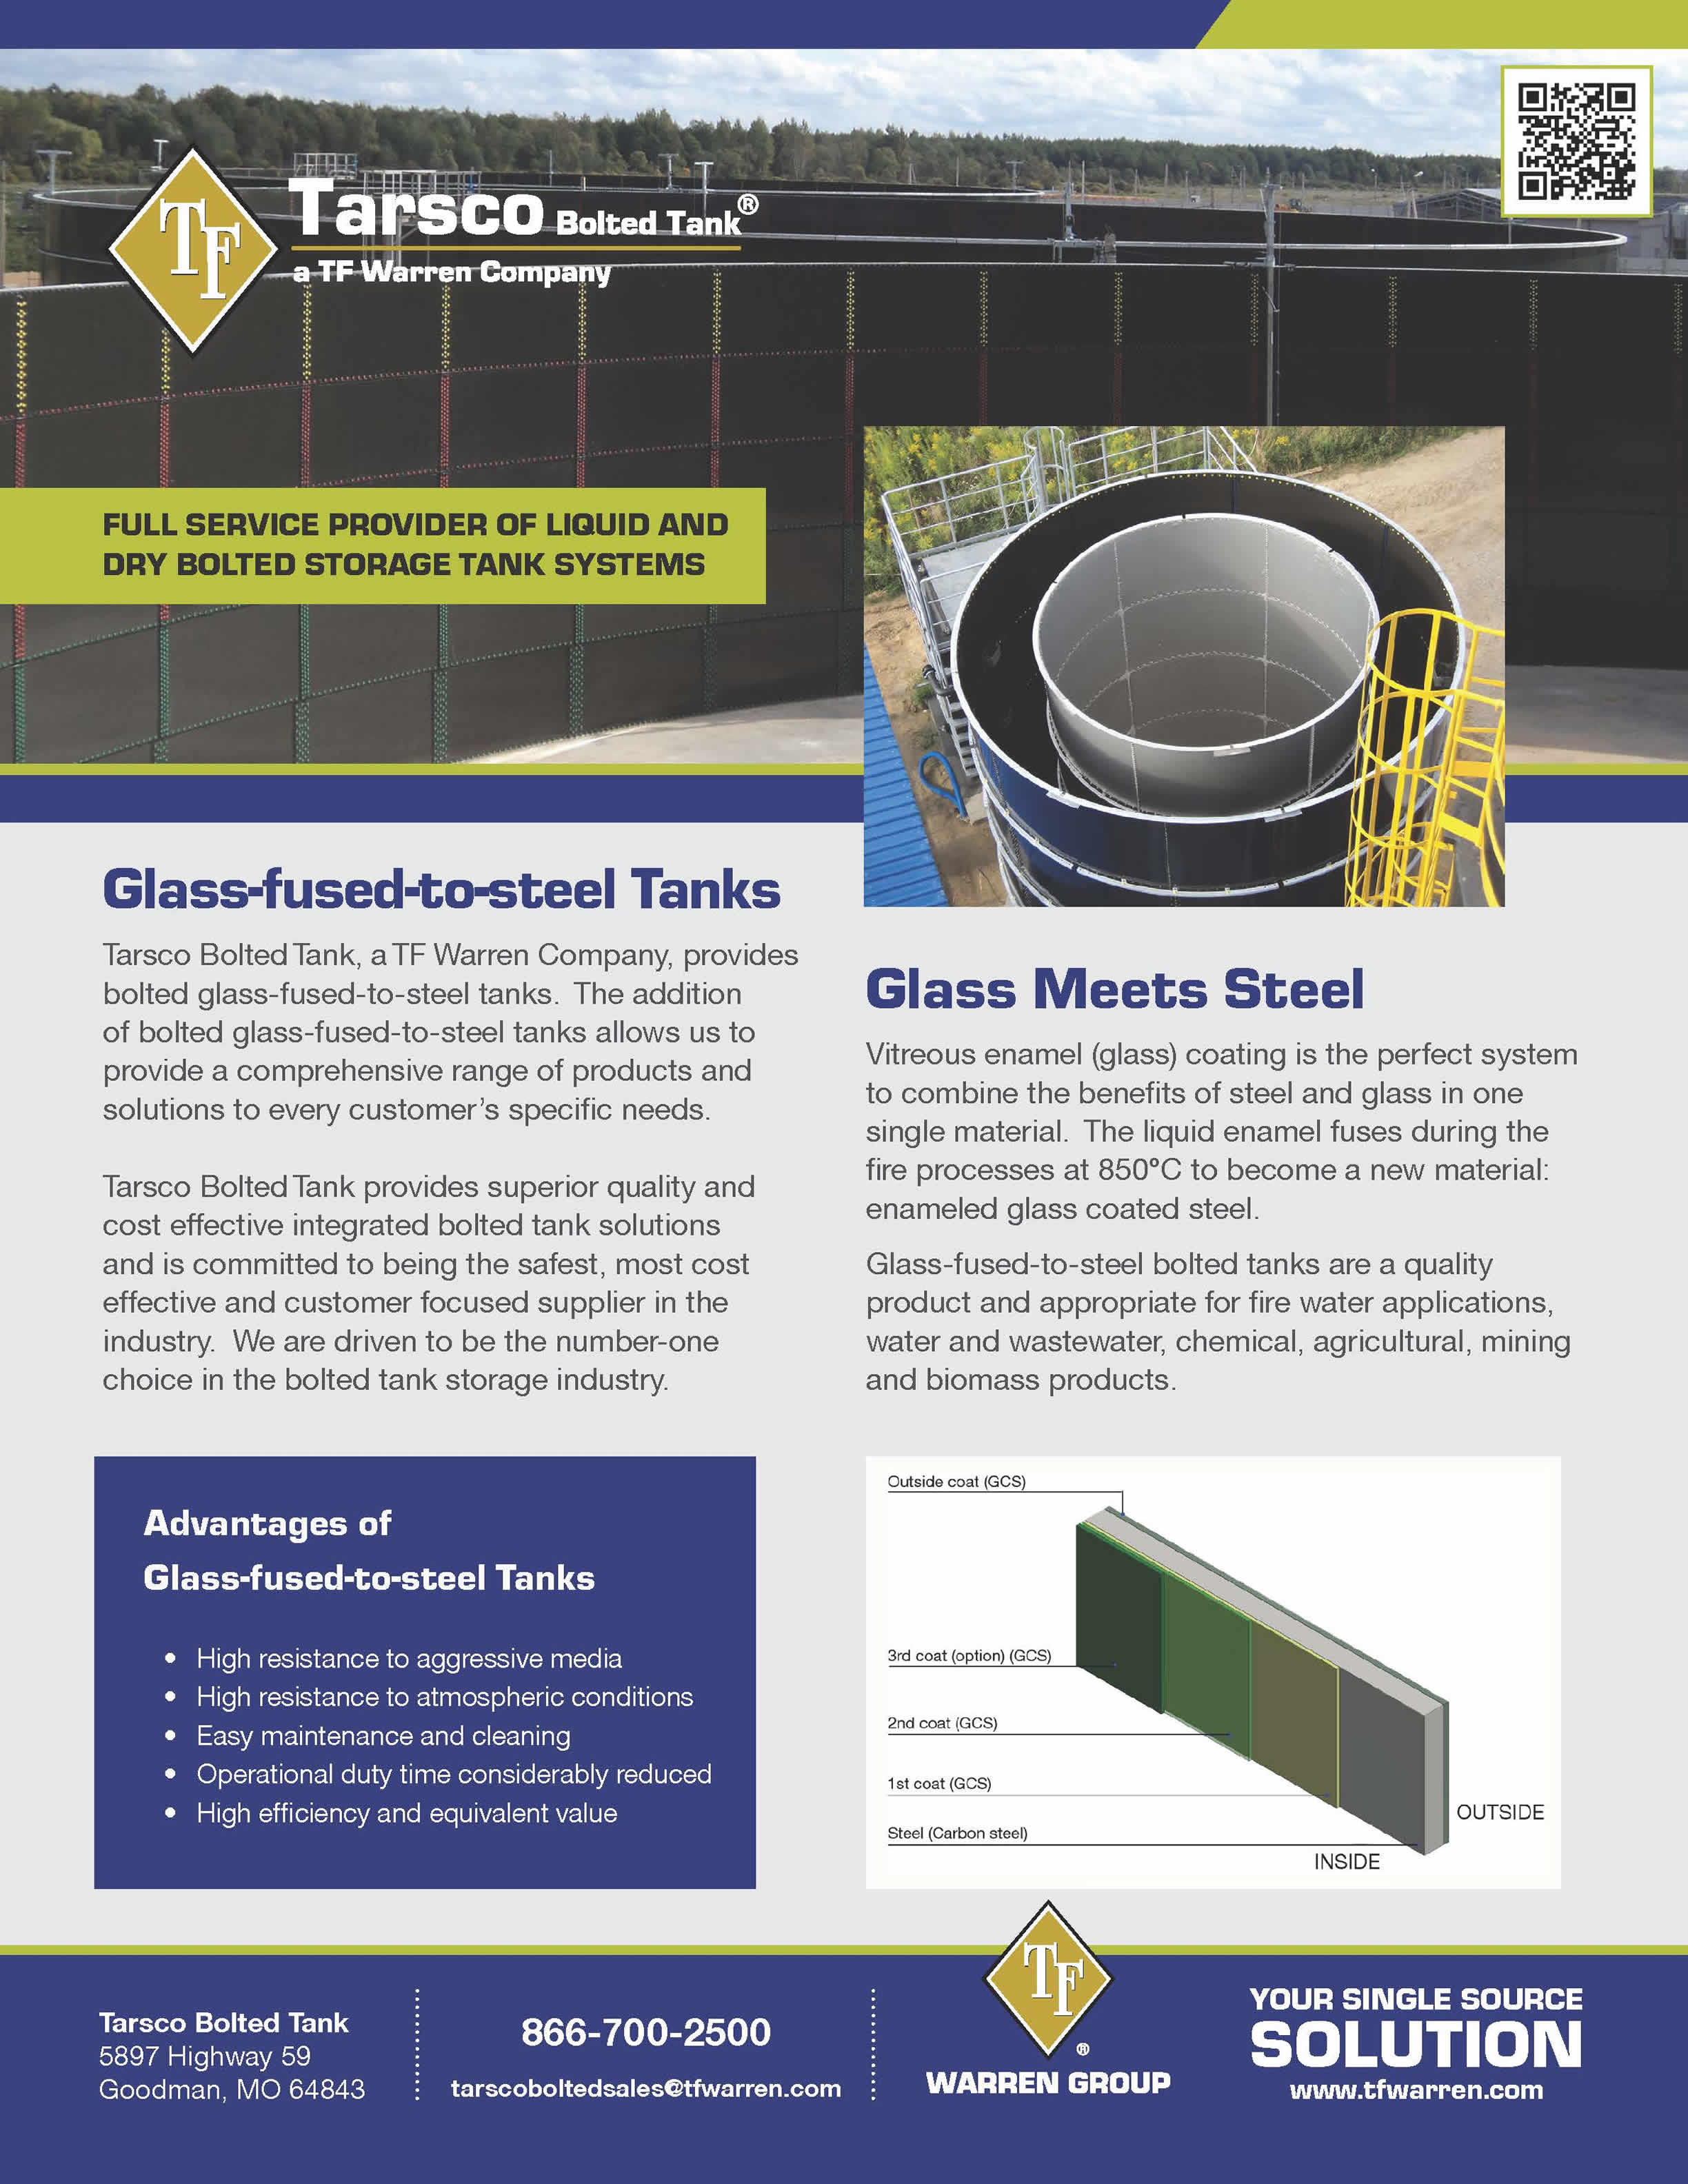 Glass-fused-to-steel Tanks